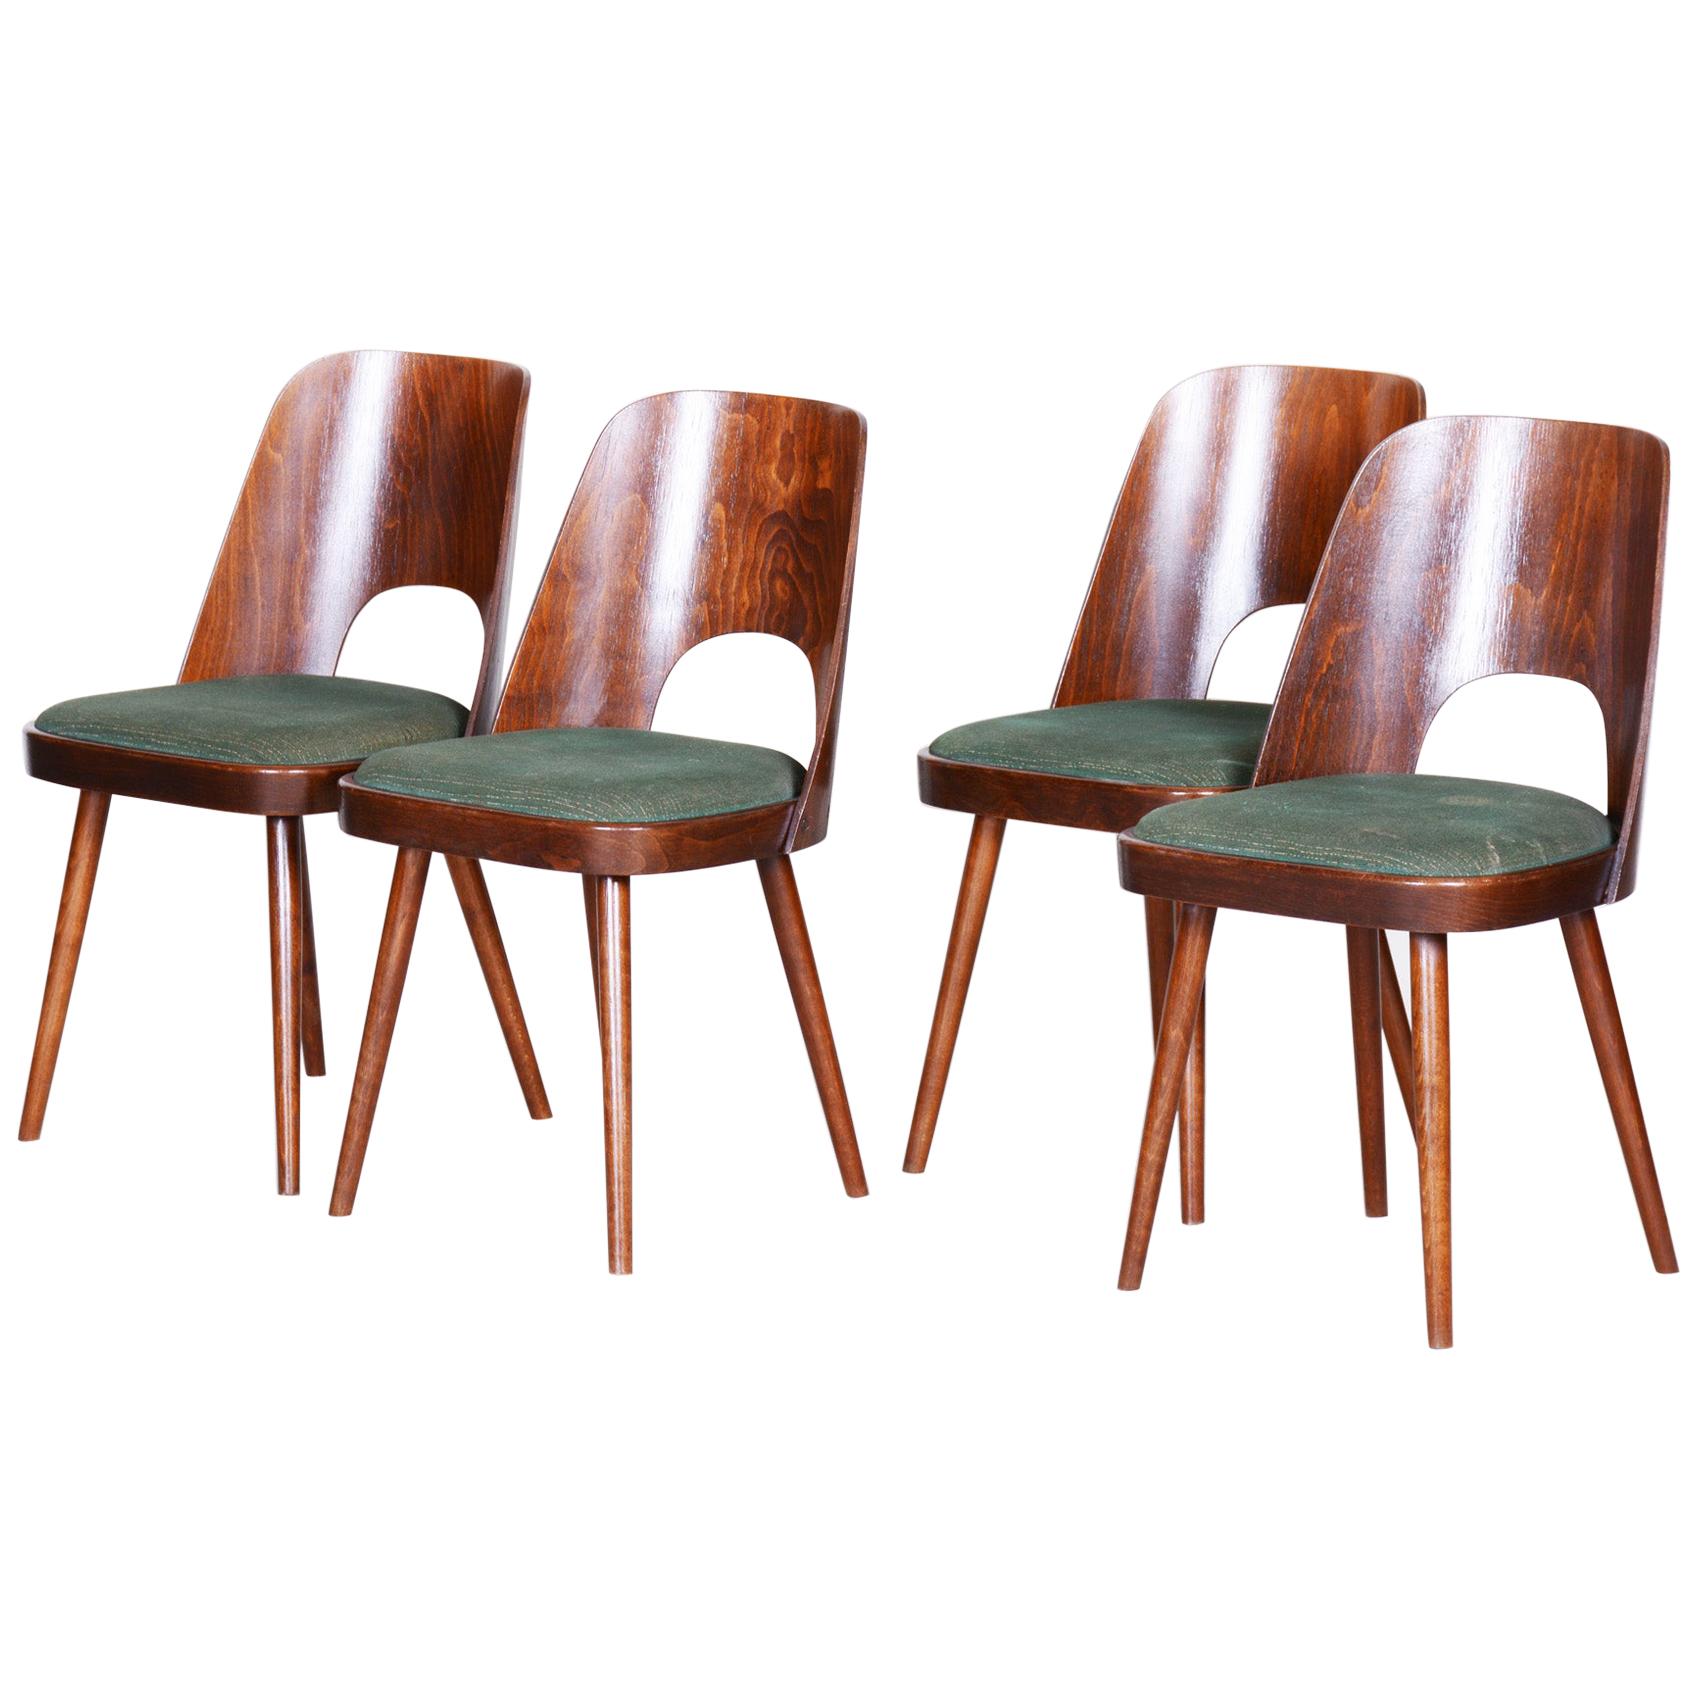 Czech Brown and Green Beech Chairs, 4 Pieces by Oswald Haerdtl - TON, 1950s